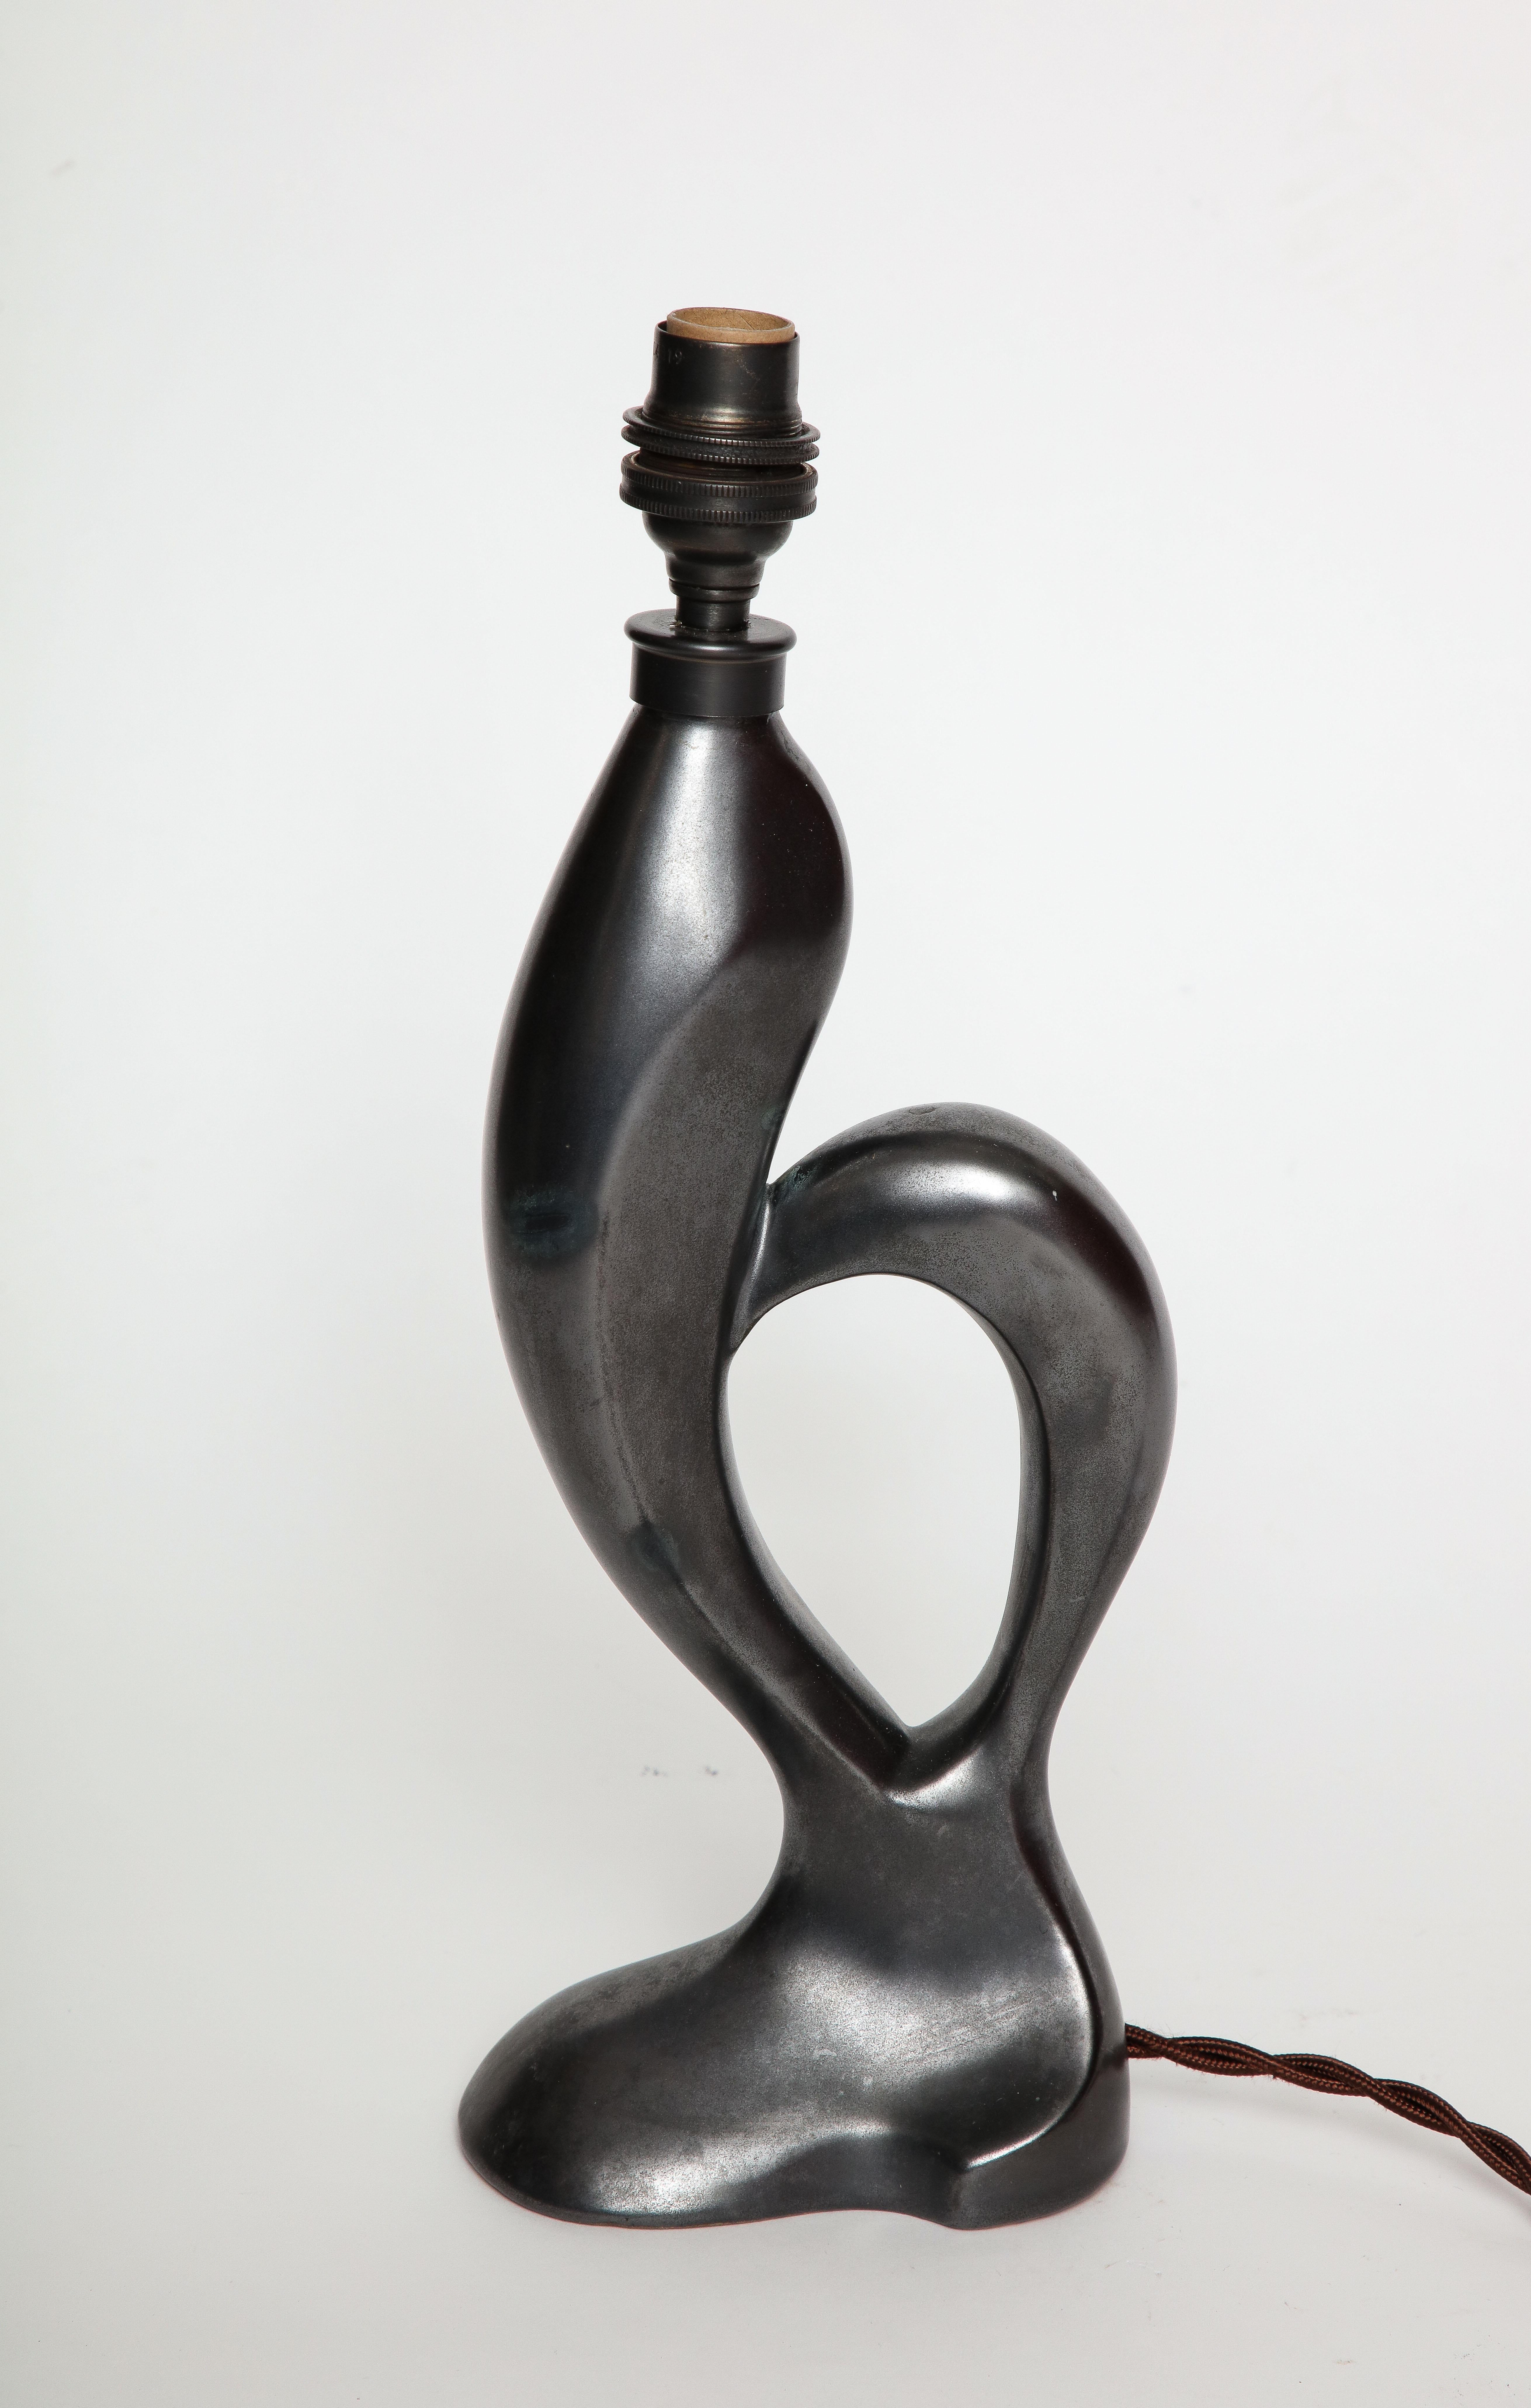 Mid-20th Century Zoomorphic French C.A.B. Lamp forming a Rooster, France, 1930-45, signed, numb.